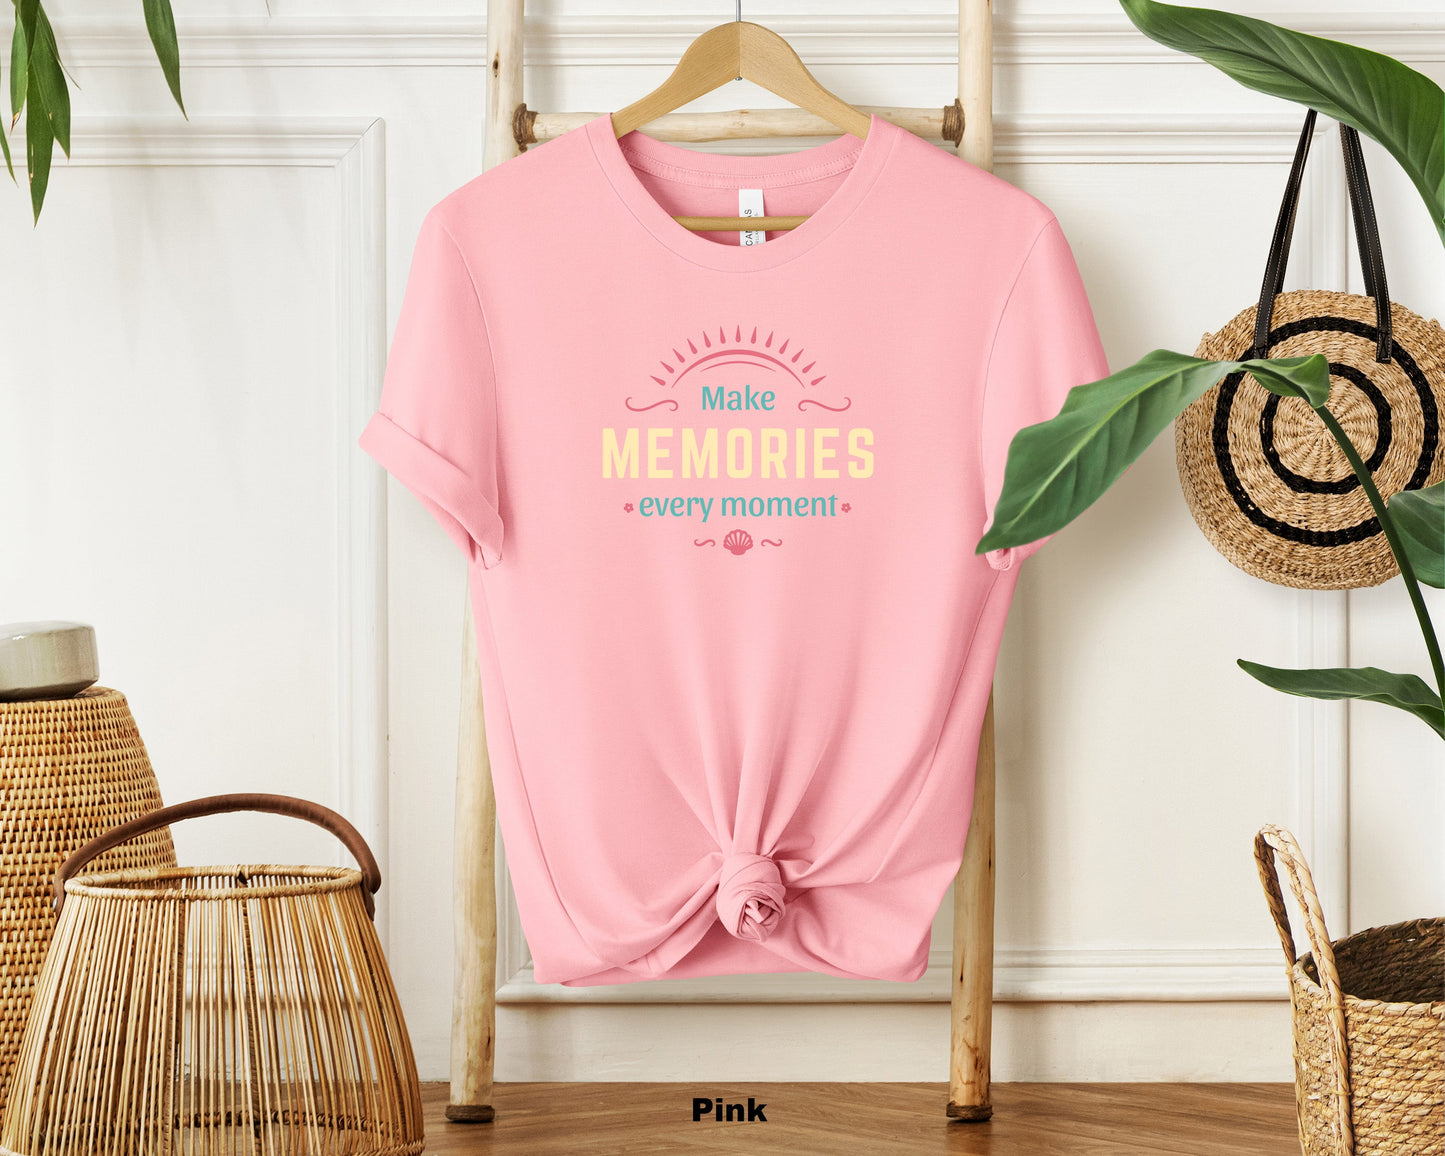 "Make Memories Every Moment Classic Unisex T-Shirt for Struggling Dreamers and Achievers"